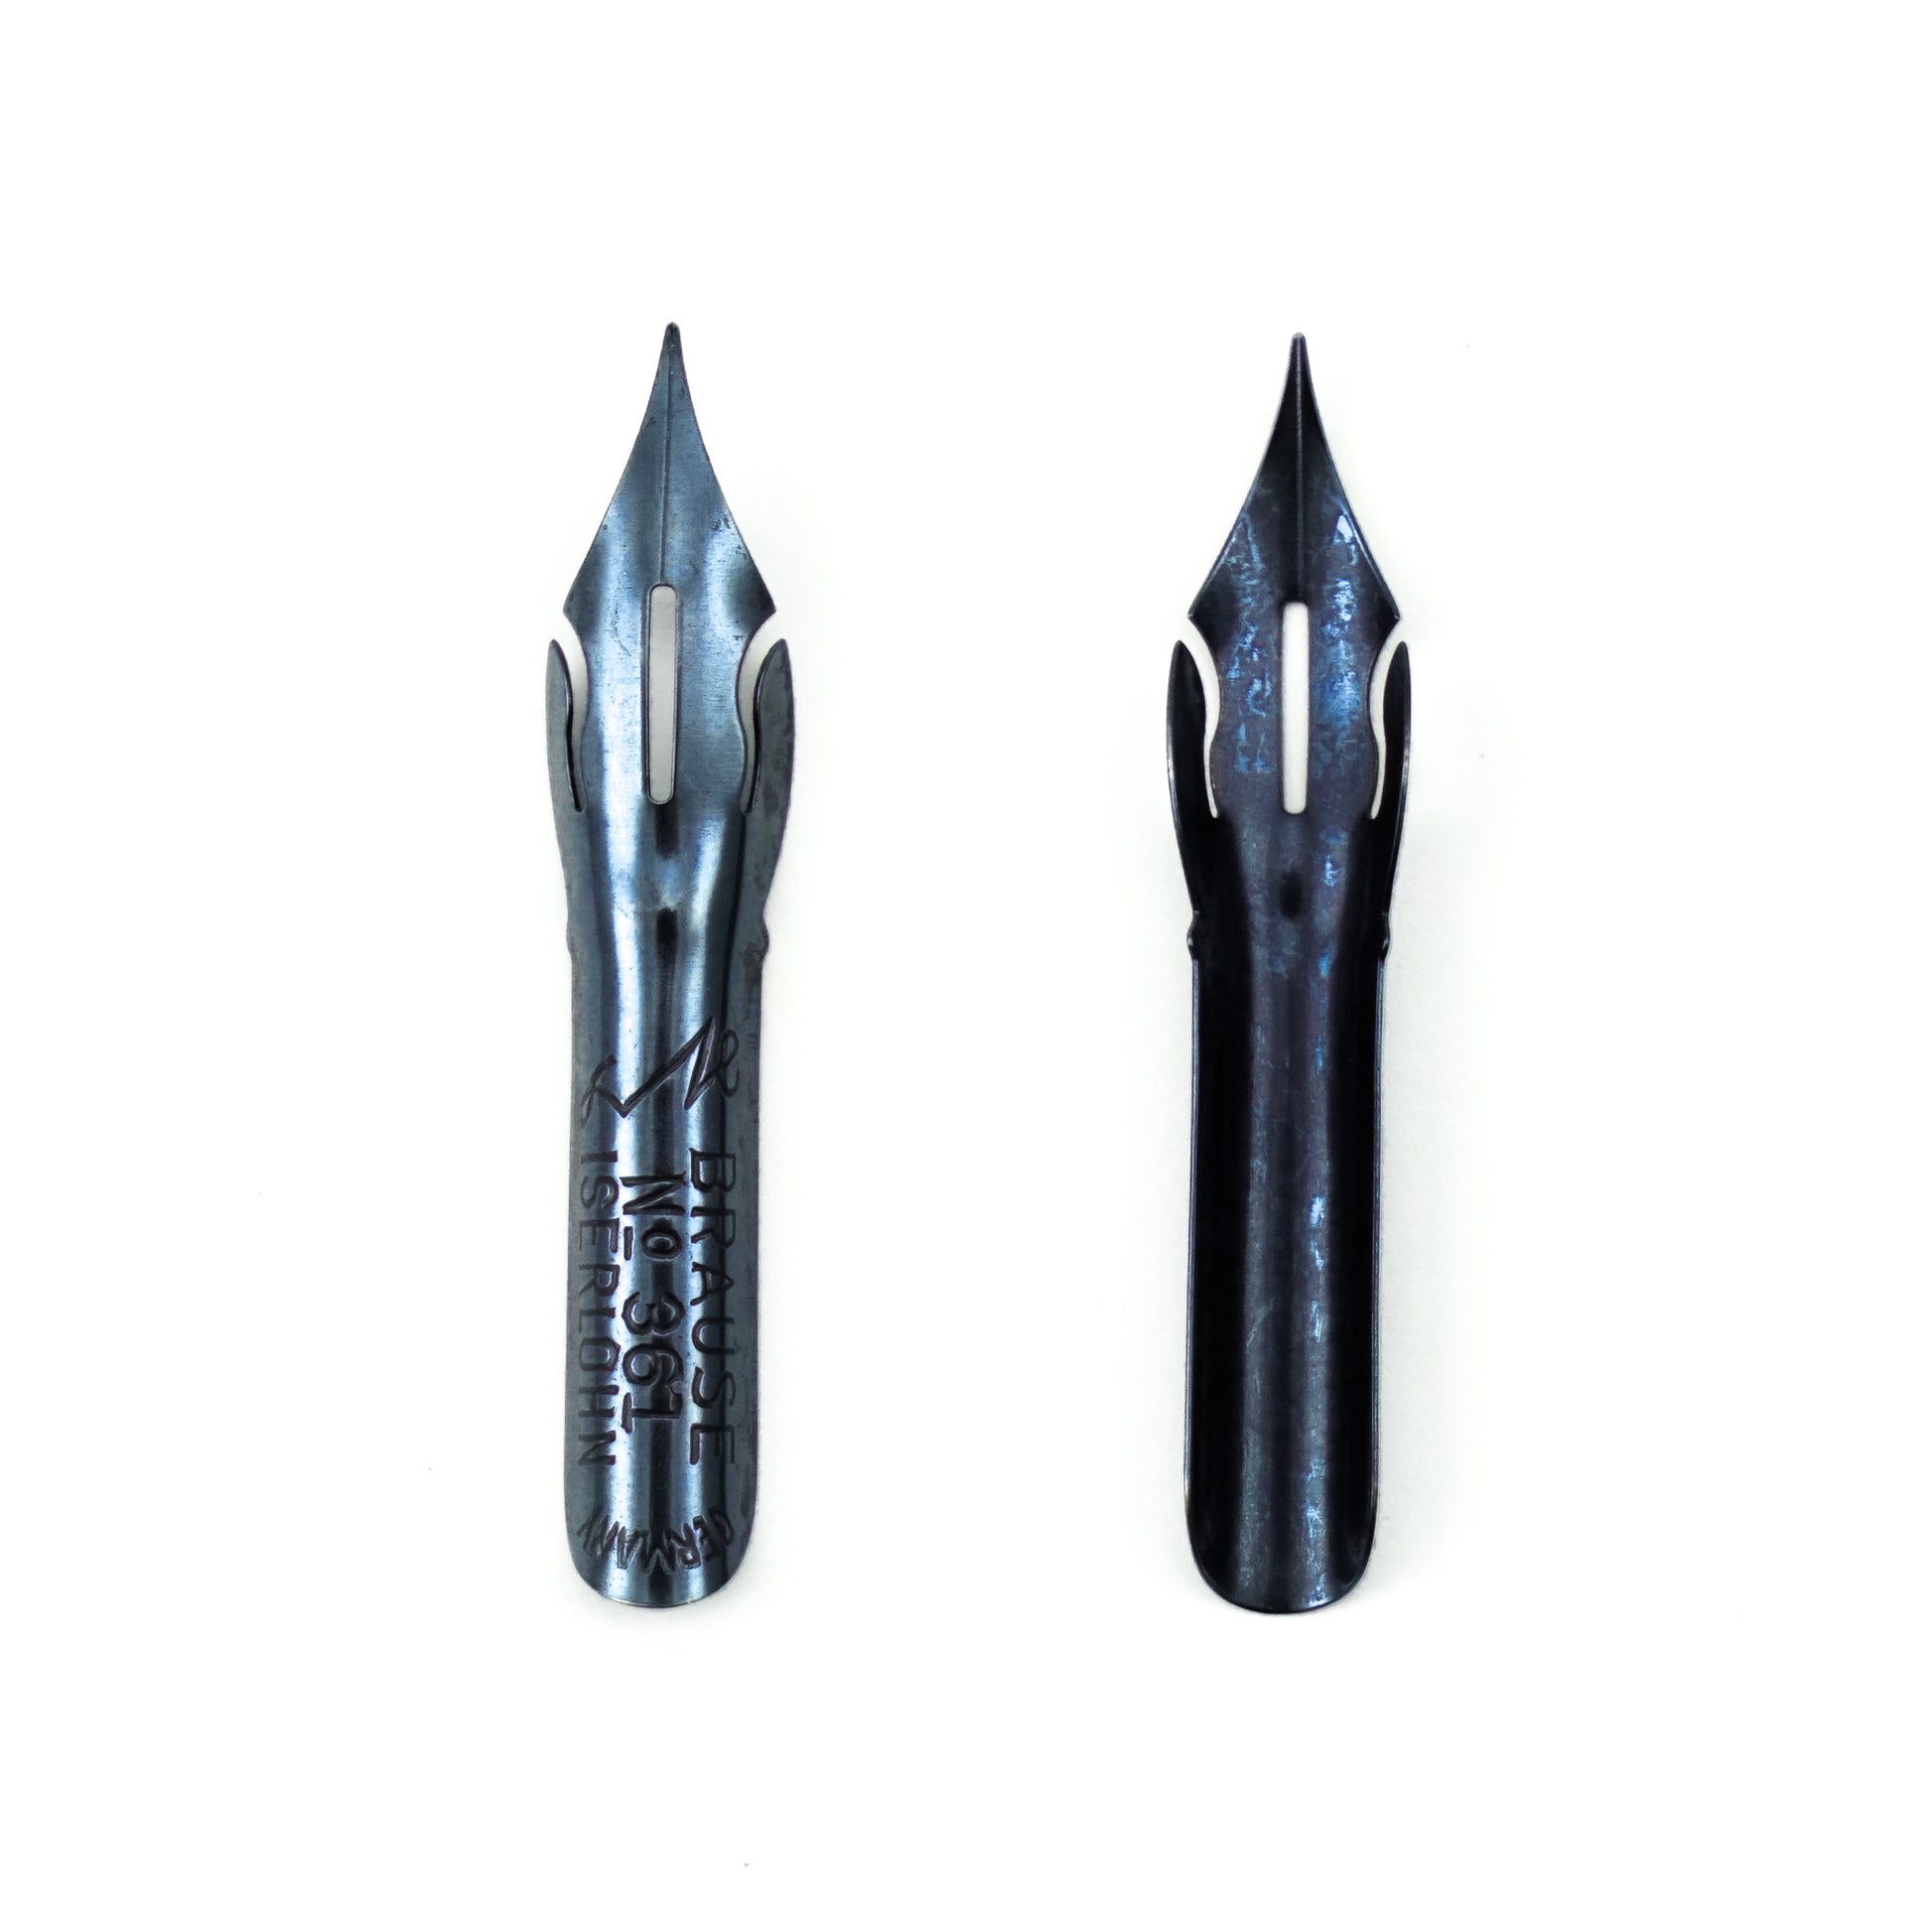 Brause Steno “Blue Pumpkin” Drawing and Calligraphy Nibs - 2/pack - by Brause - K. A. Artist Shop